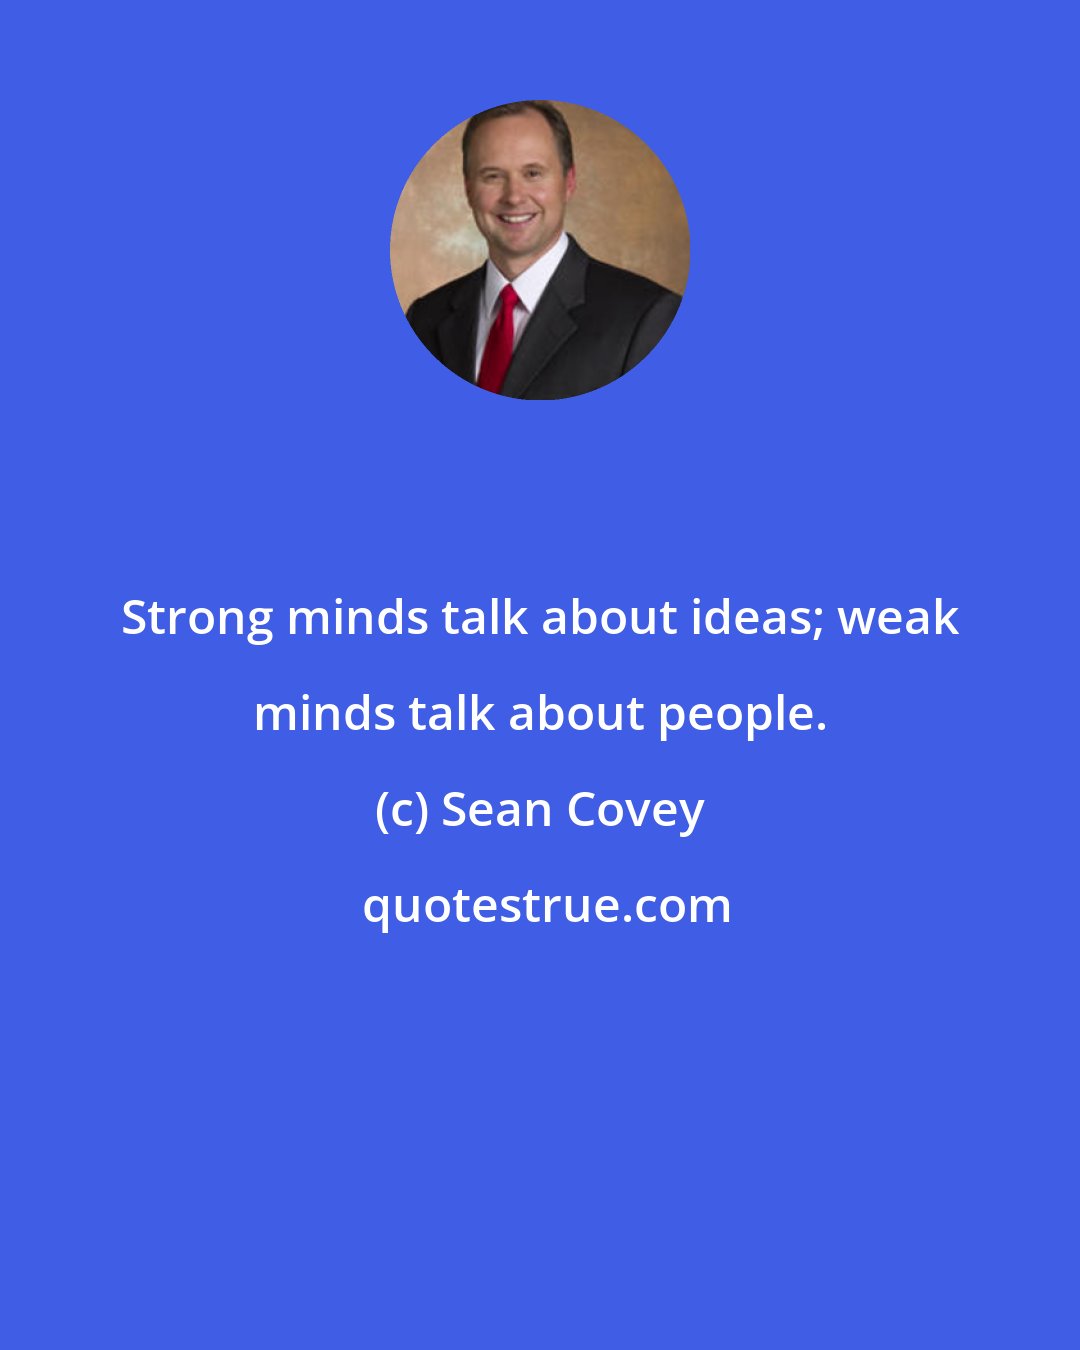 Sean Covey: Strong minds talk about ideas; weak minds talk about people.